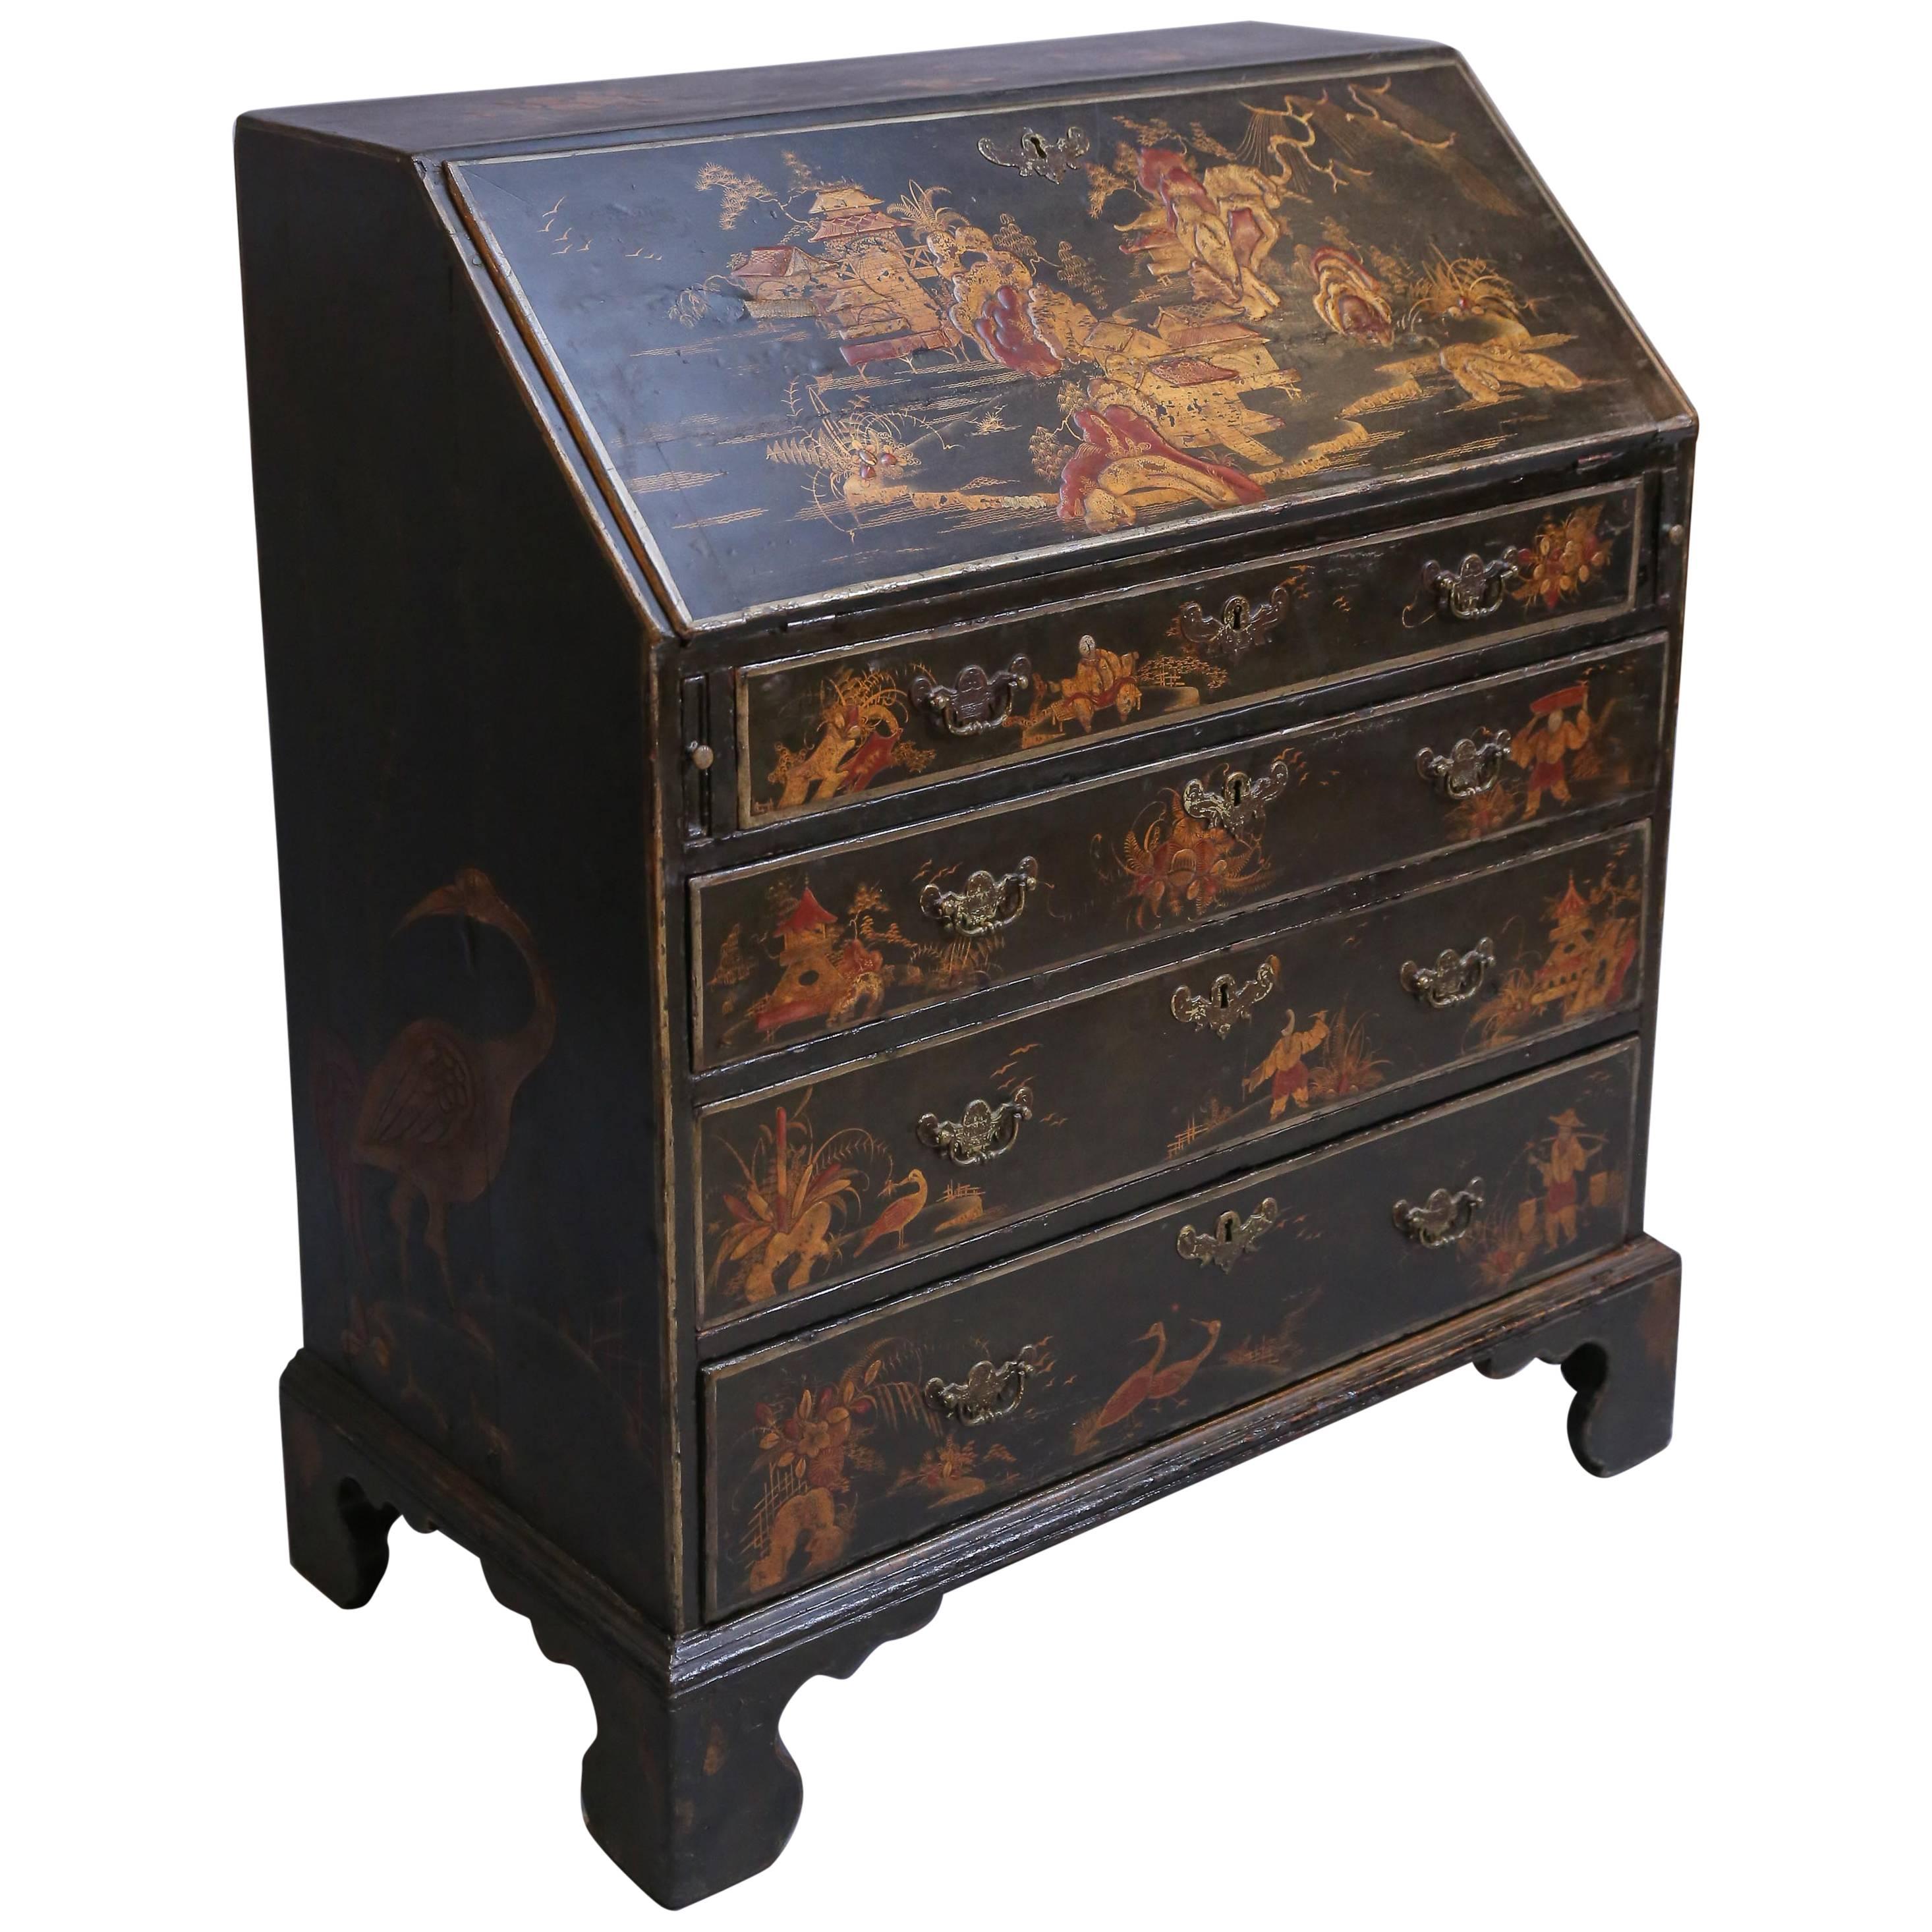 Antique English Black Chinoiserie Slant Desk with a Vibrant Red Interior